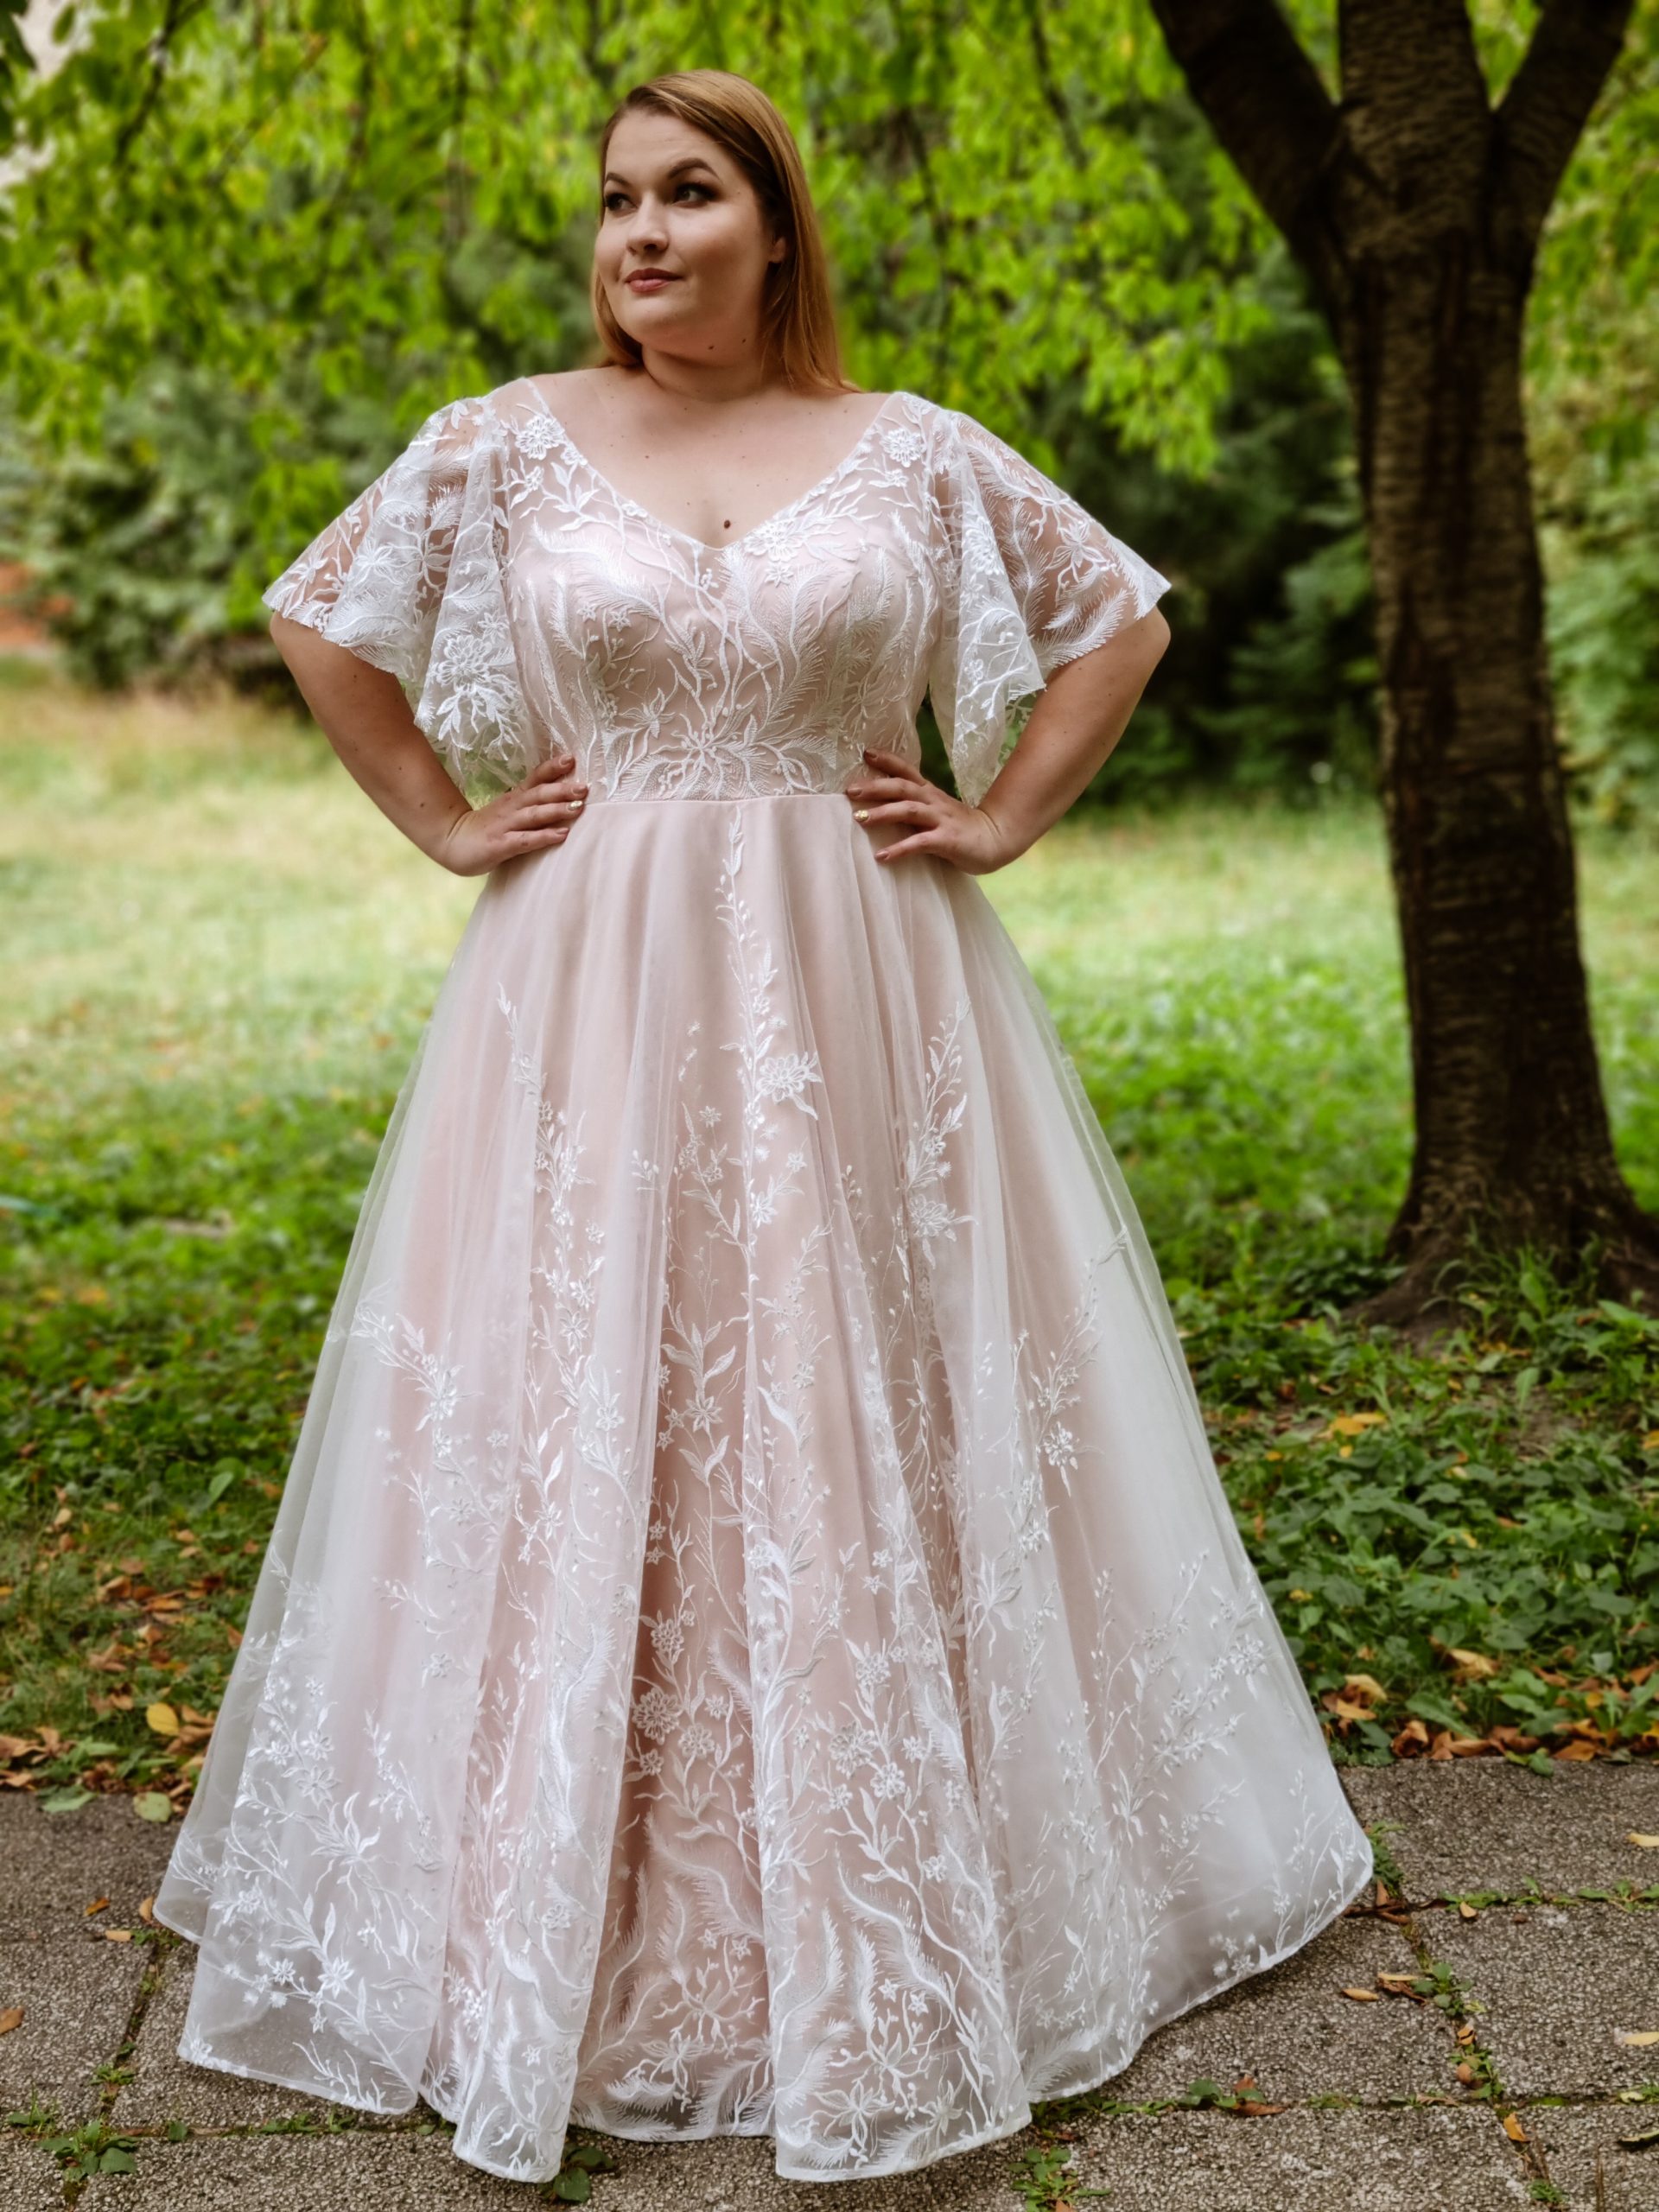 Plus Size Wedding Dresses To Let You Shine Armchair Theology